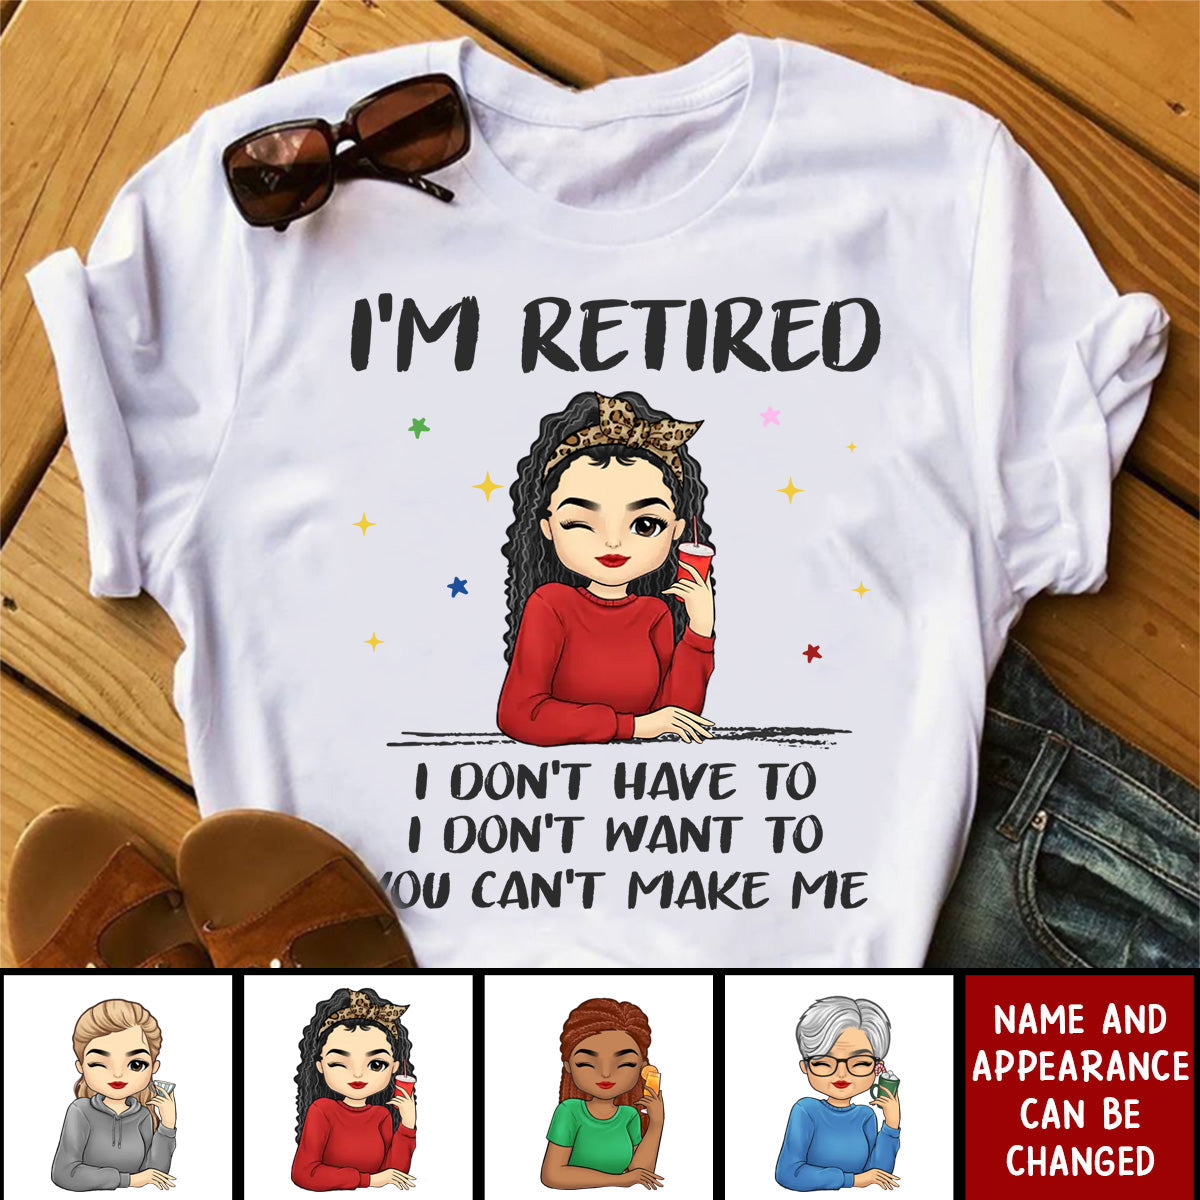 I'm Retired, I Don't Have To - Family Personalized T-shirt - Gift For Family Members